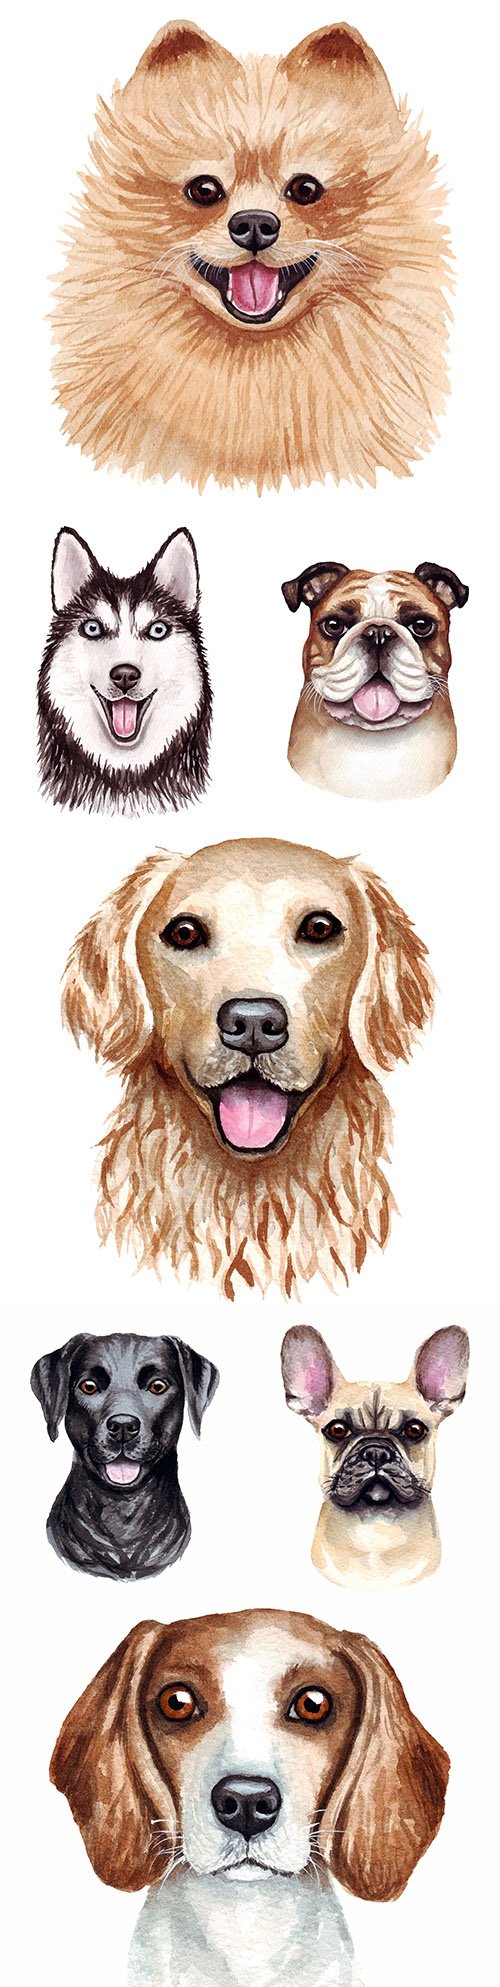 Popular dog of different breed watercolor illustrations